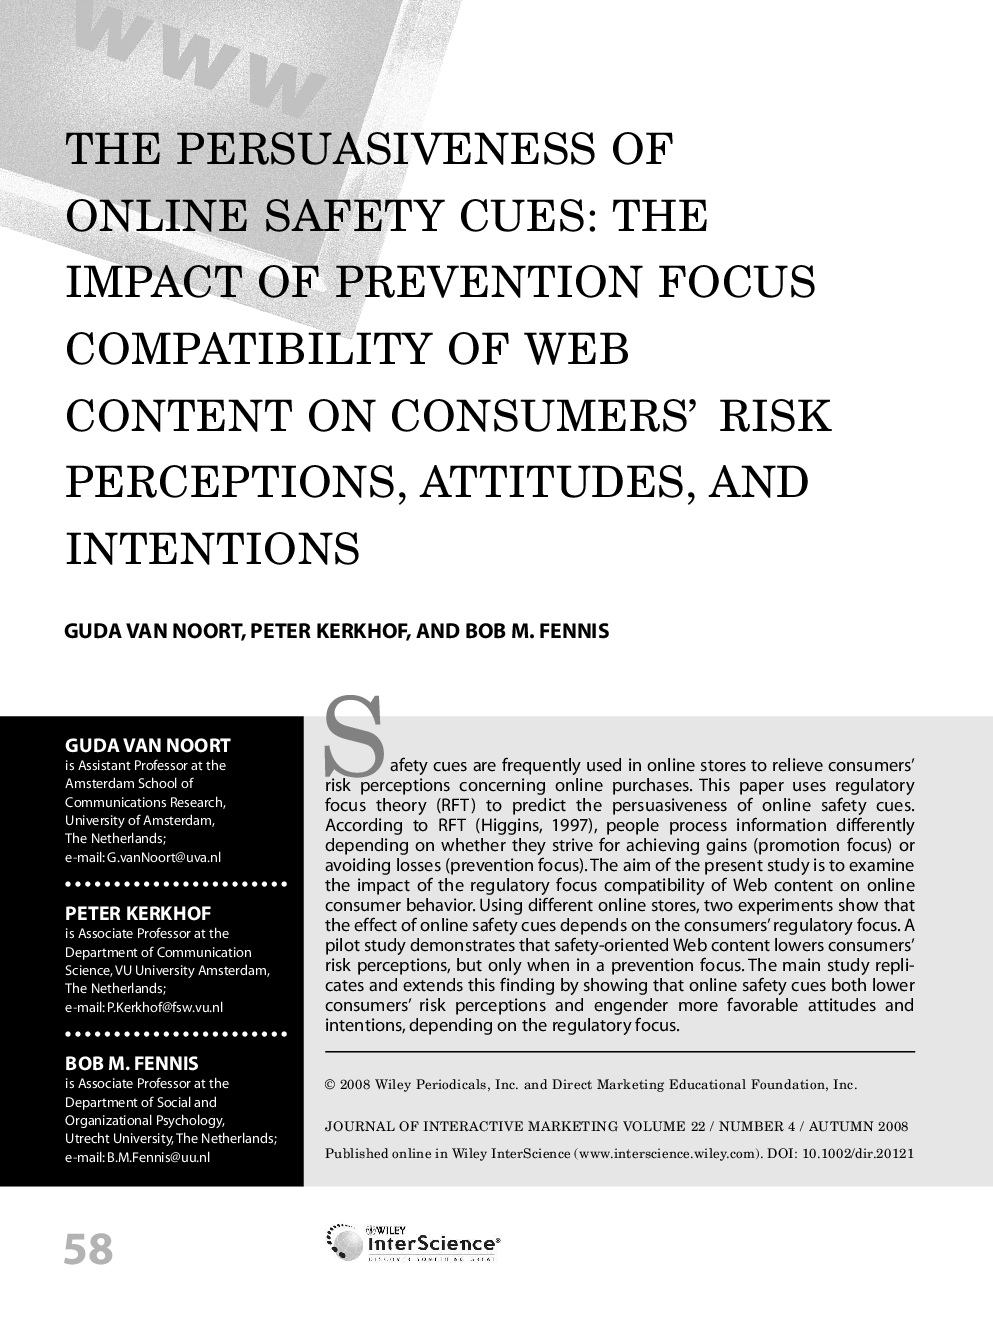 The persuasiveness of online safety cues: The impact of prevention focus compatibility of Web content on consumers’ risk perceptions, attitudes, and intentions